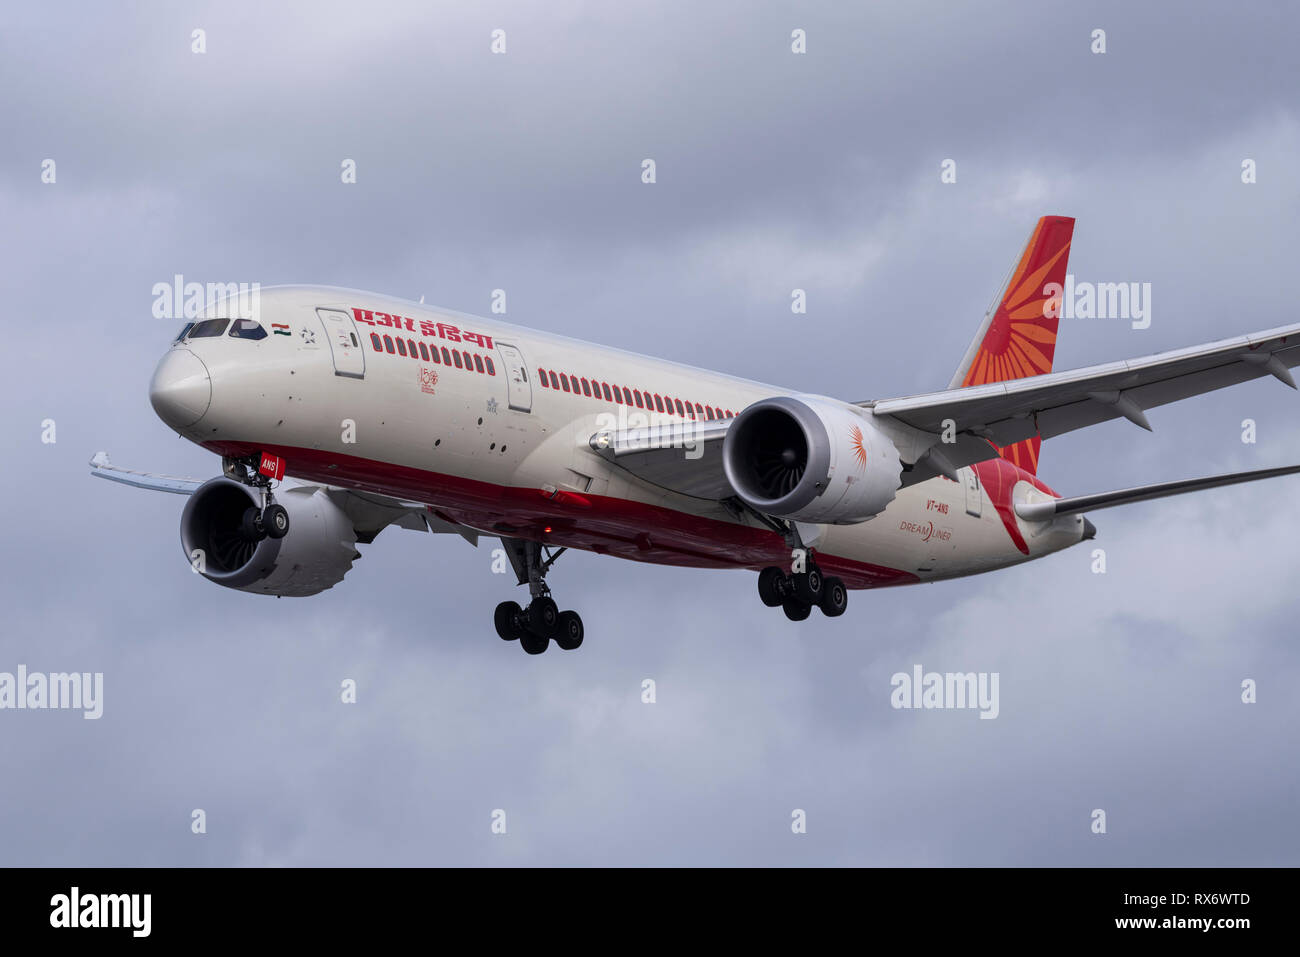 Air India Boeing 787 Dreamliner airliner jet plane on final approach to land at London Heathrow Airport, UK in cloudy weather. Landing Stock Photo